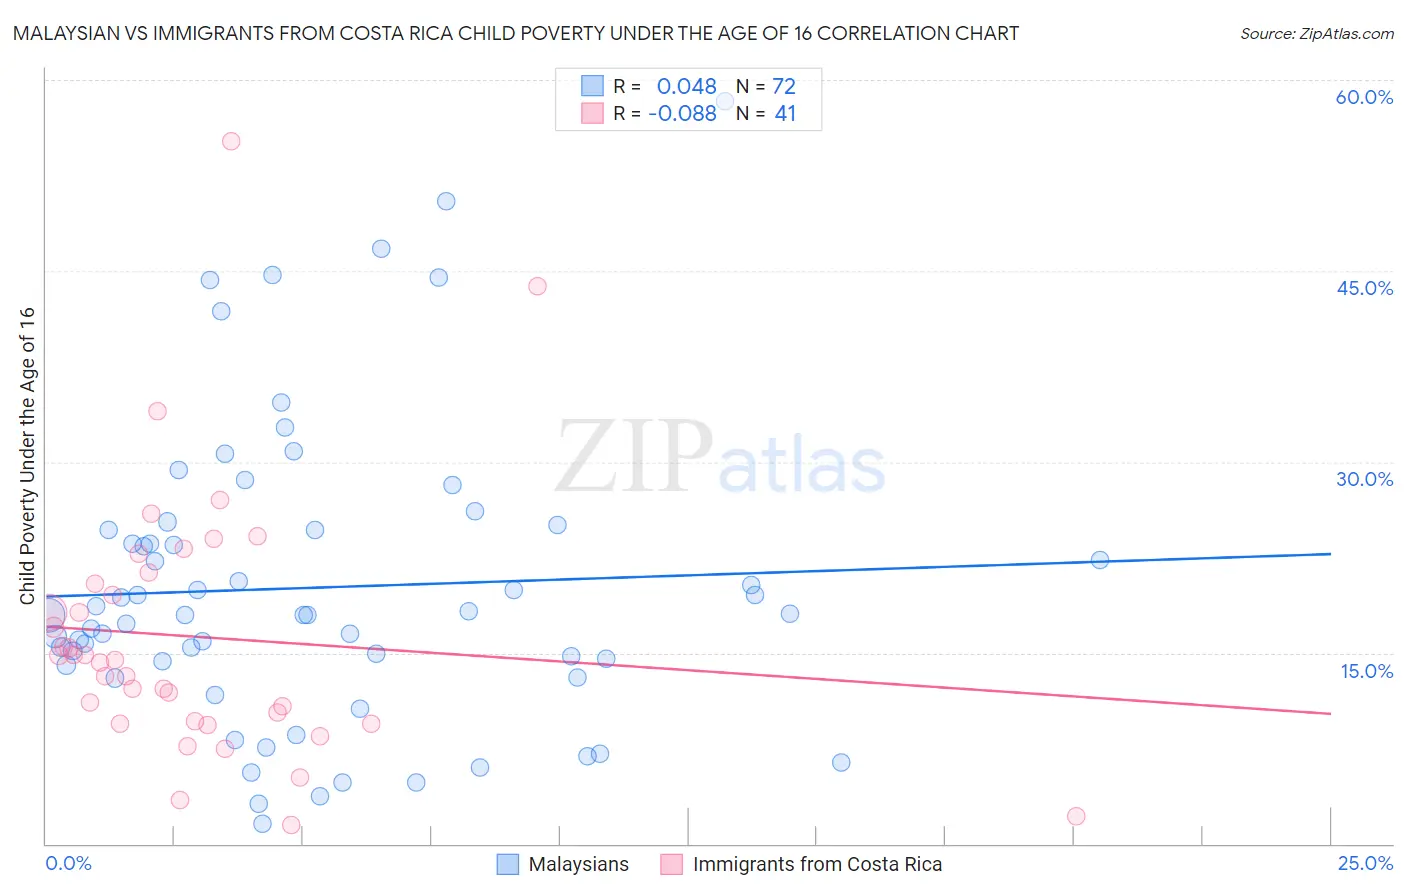 Malaysian vs Immigrants from Costa Rica Child Poverty Under the Age of 16